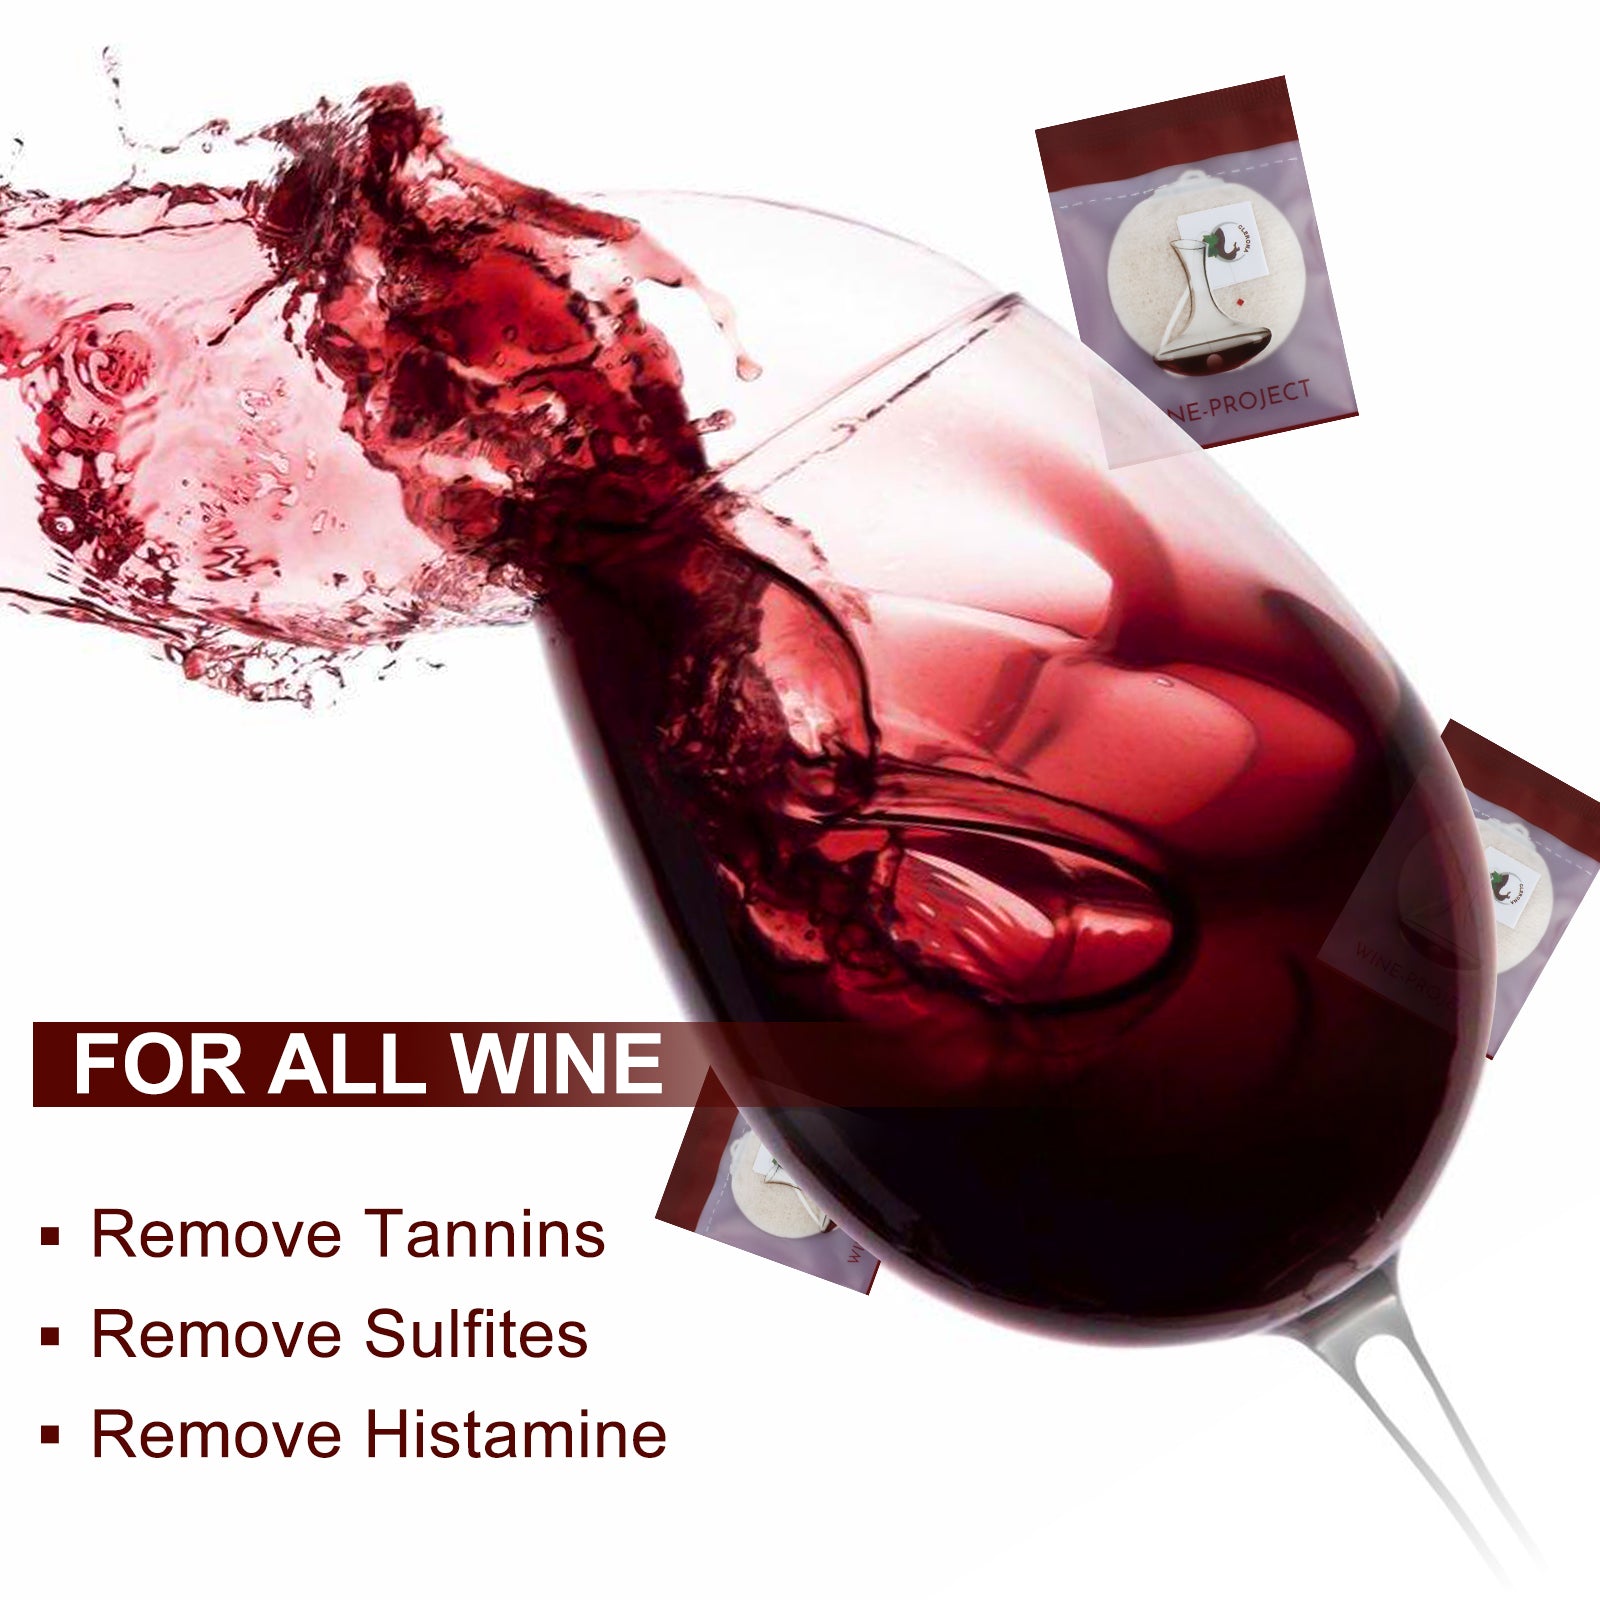 Wine Wand Wine Filters for Histamine and Sulfite Remover, the Wand